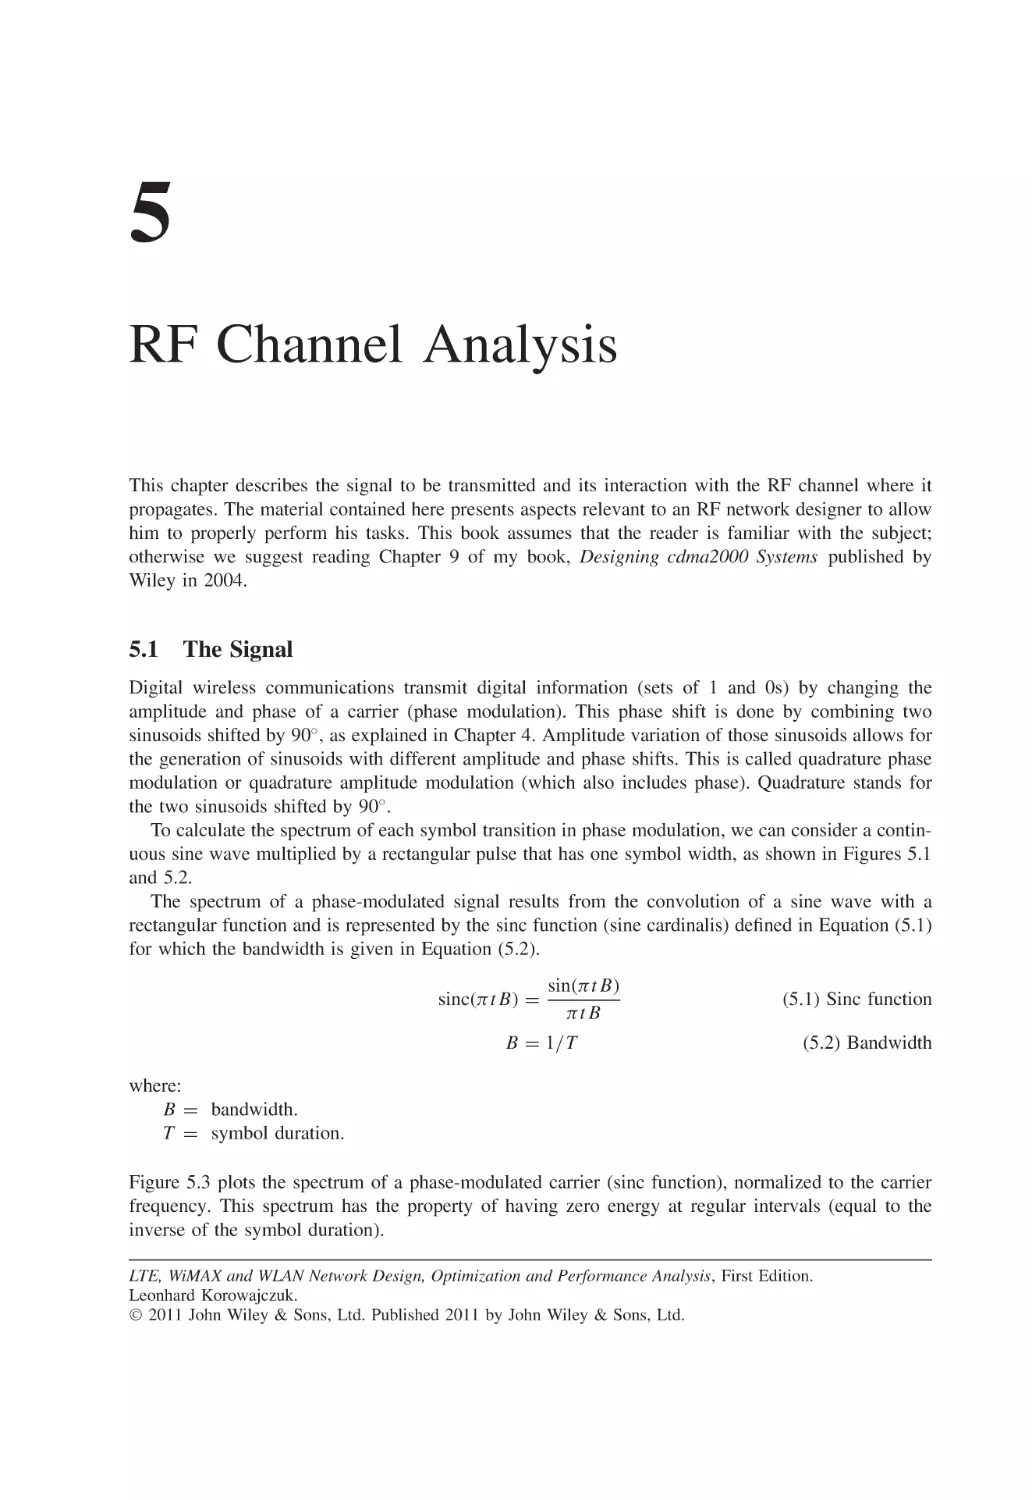 5 RF Channel Analysis
5.1 The Signal